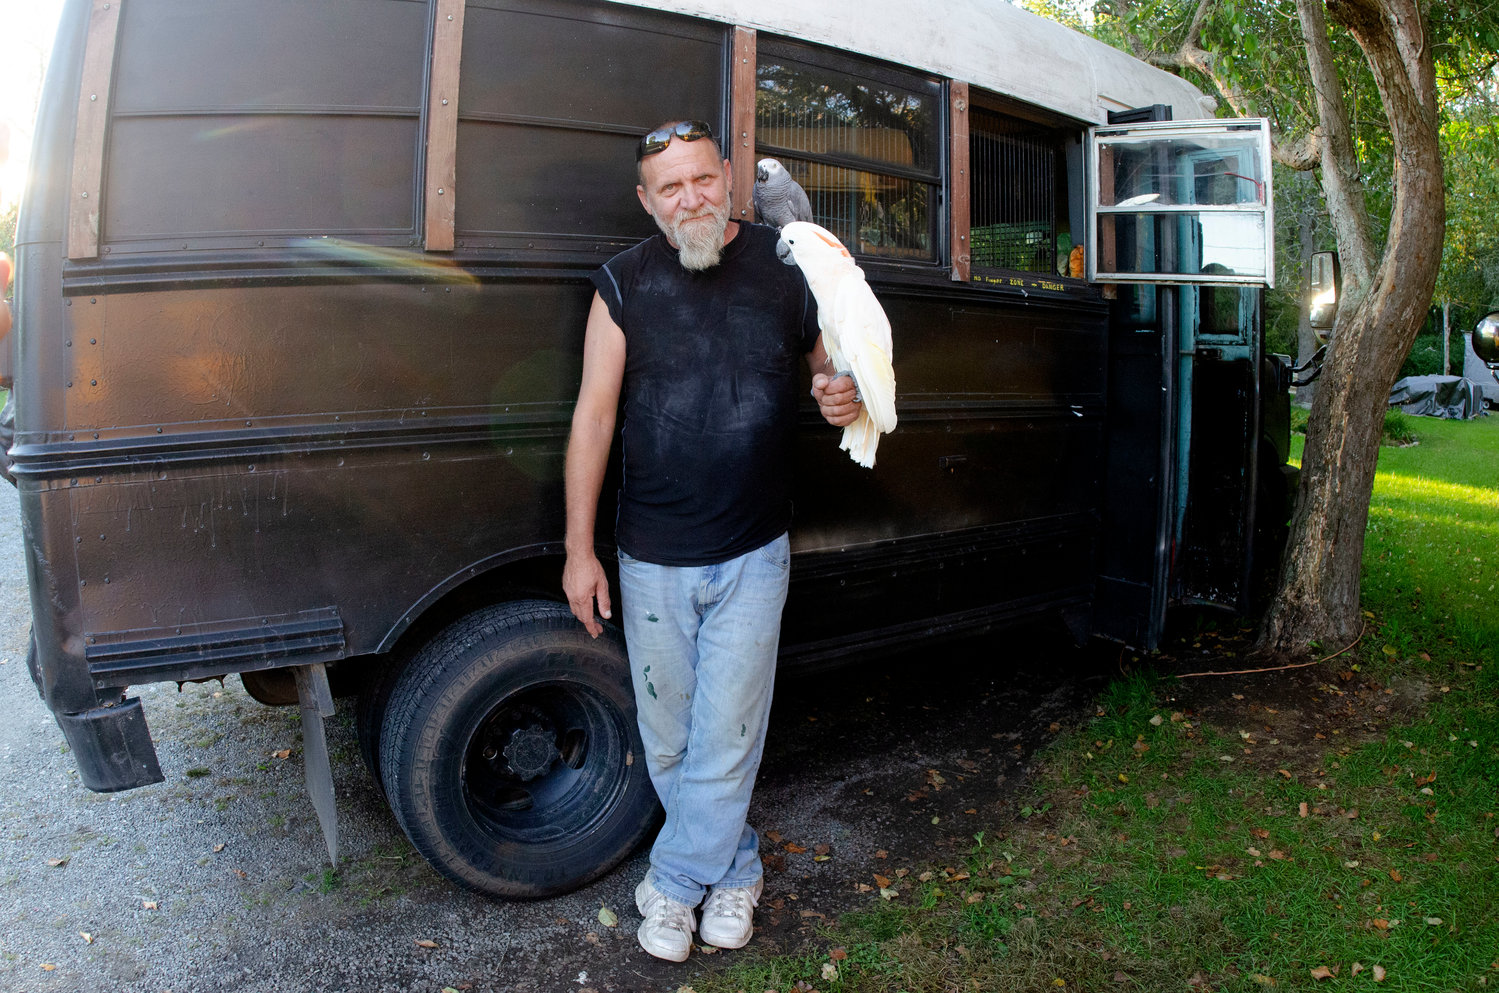 Ed Aldrich's "Bird Bus" needs too much work to keep on the road, so he is hoping to fix up a new bus he purchased for $4,000.